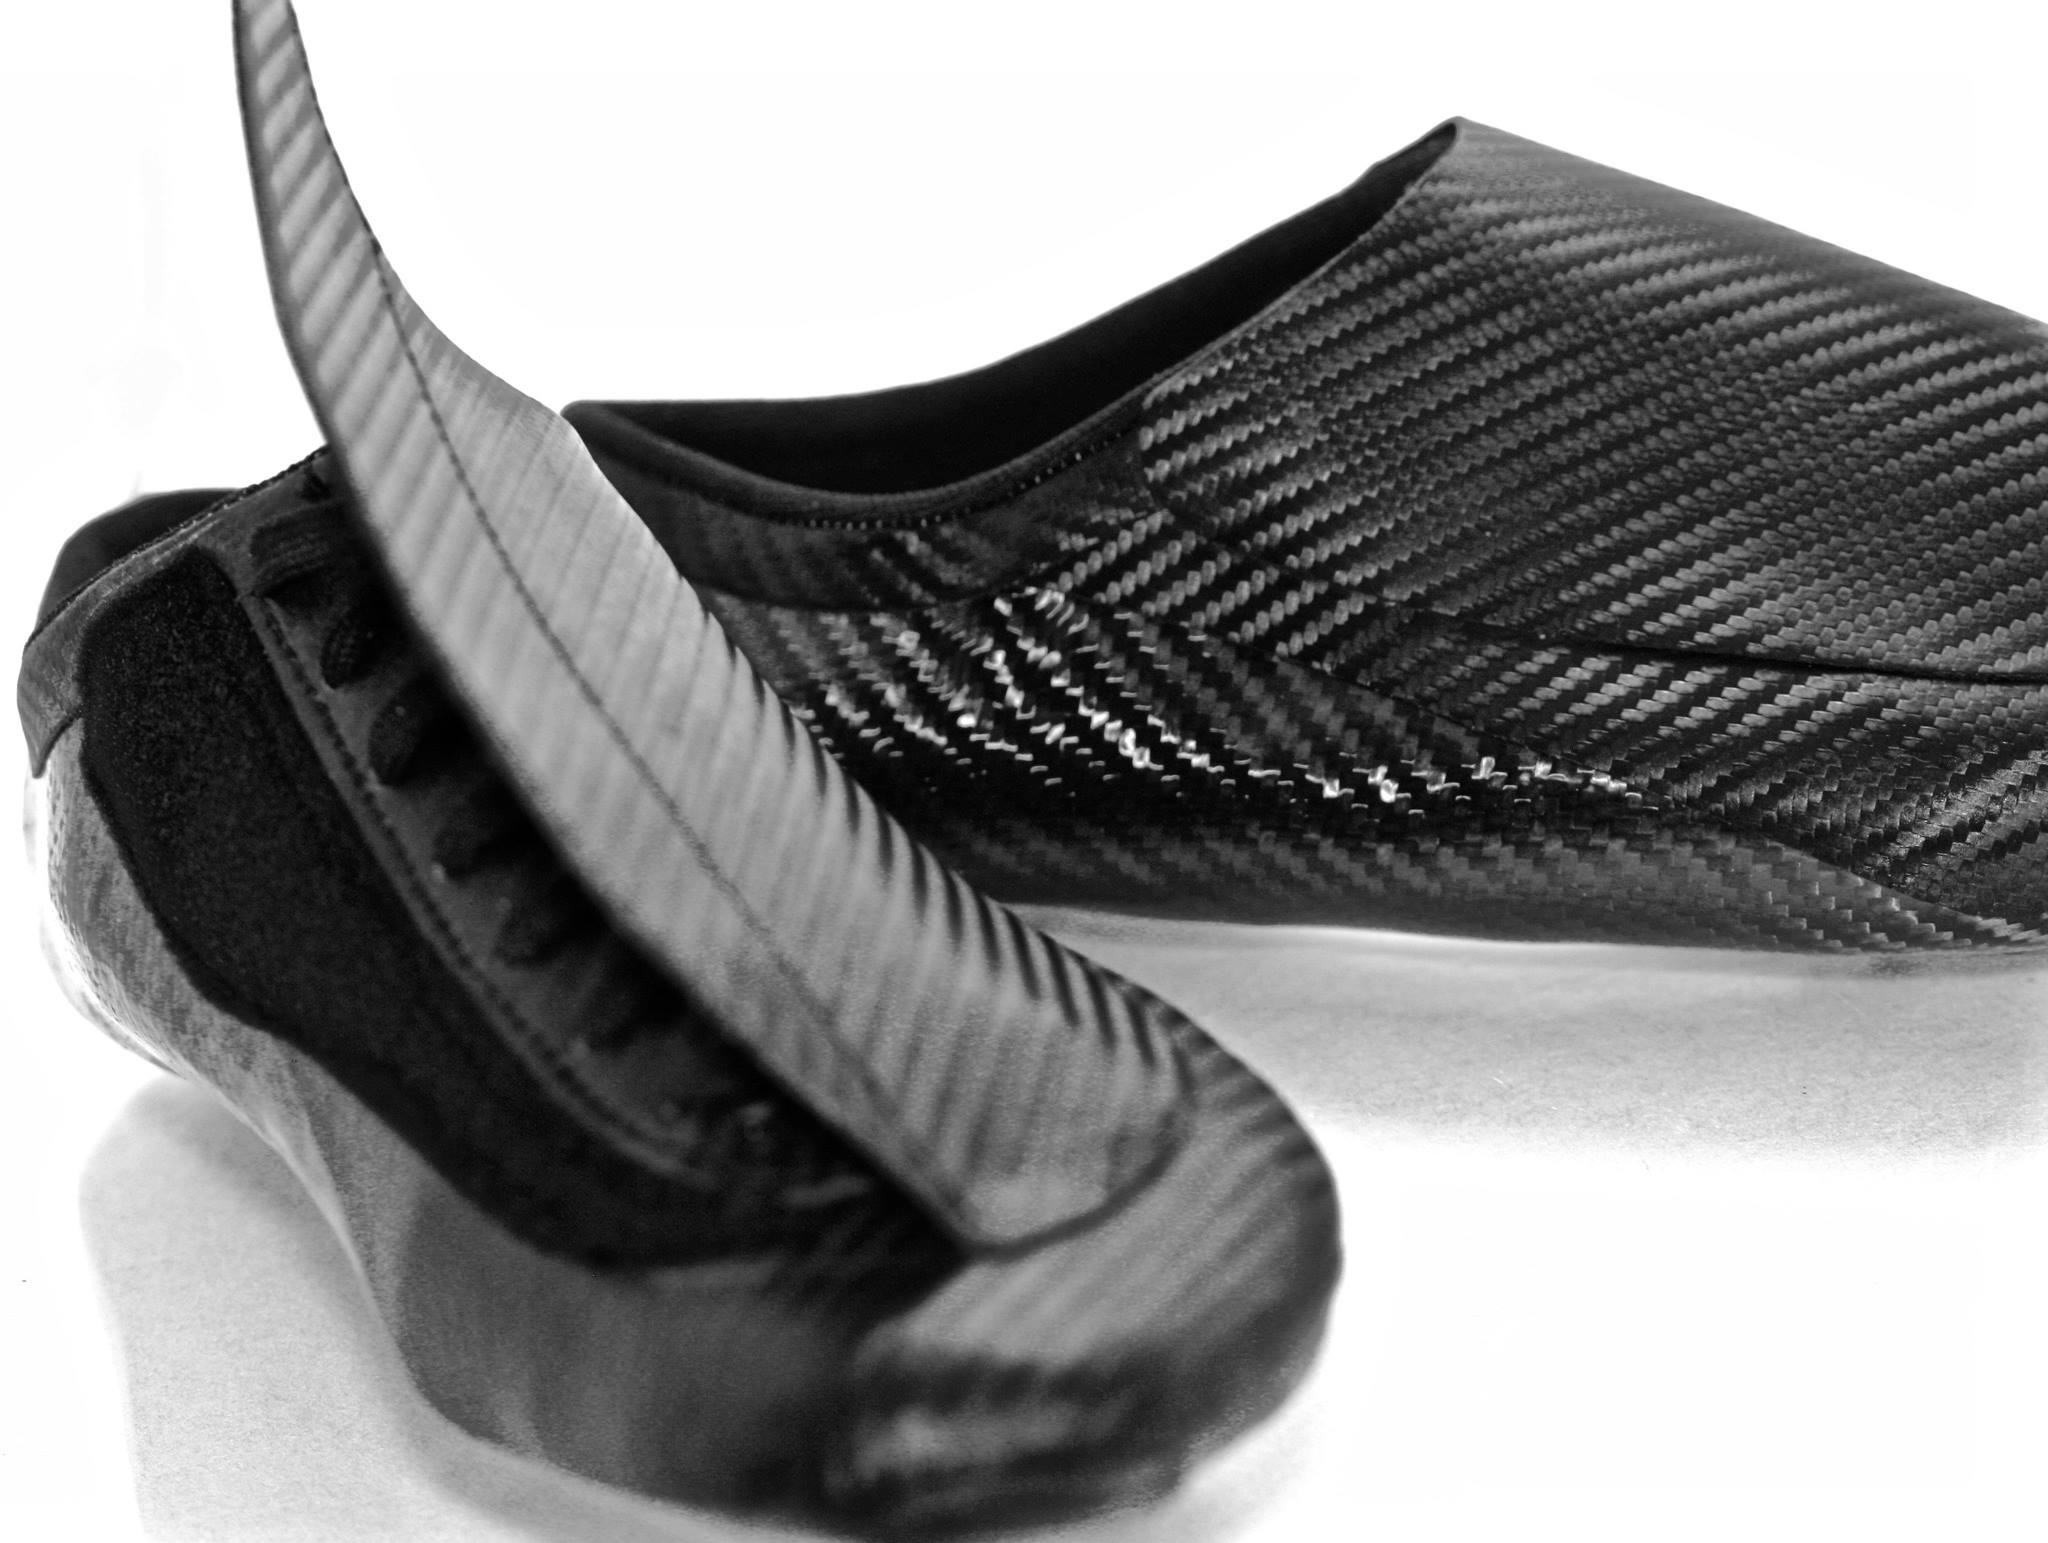 custom carbon cycling shoes